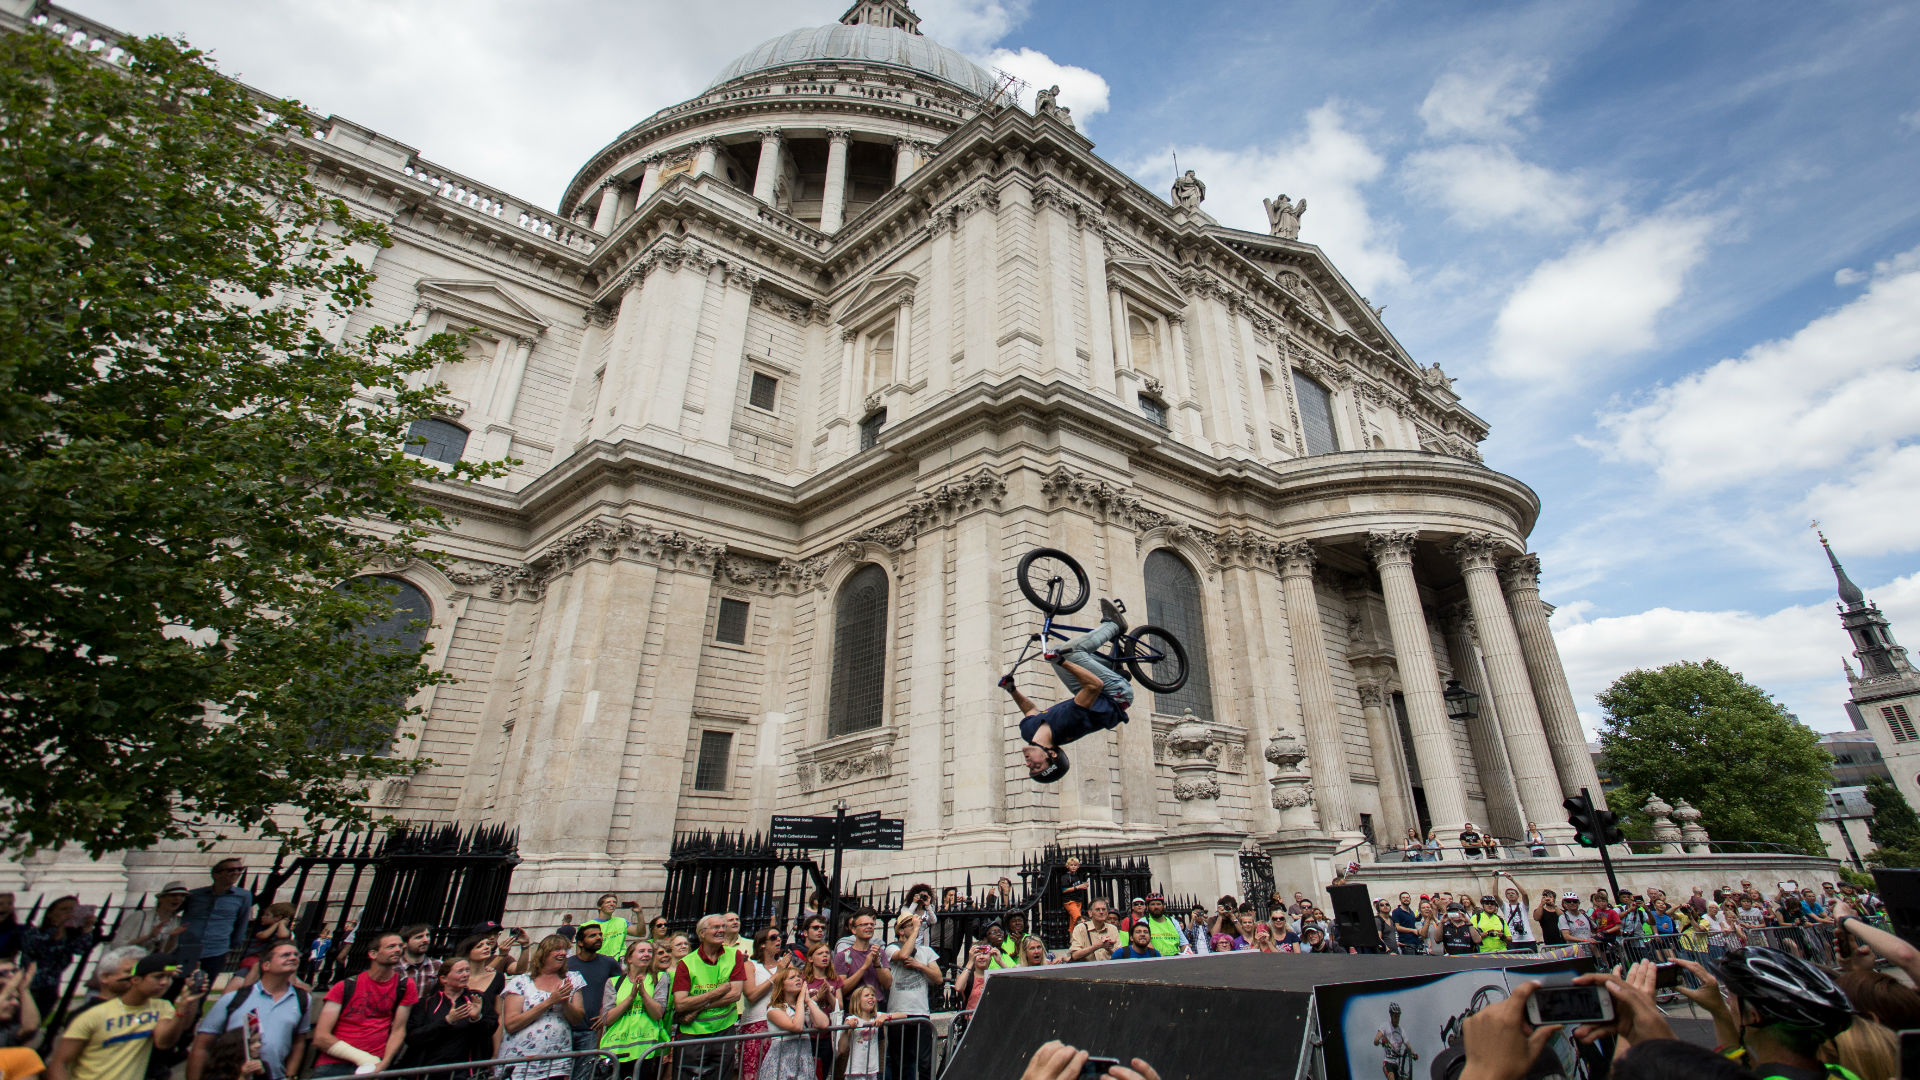 A cyclist does a backflip at the St Pauls Prudential RideLondon Festival Zone. Image courtesy of RideLondon